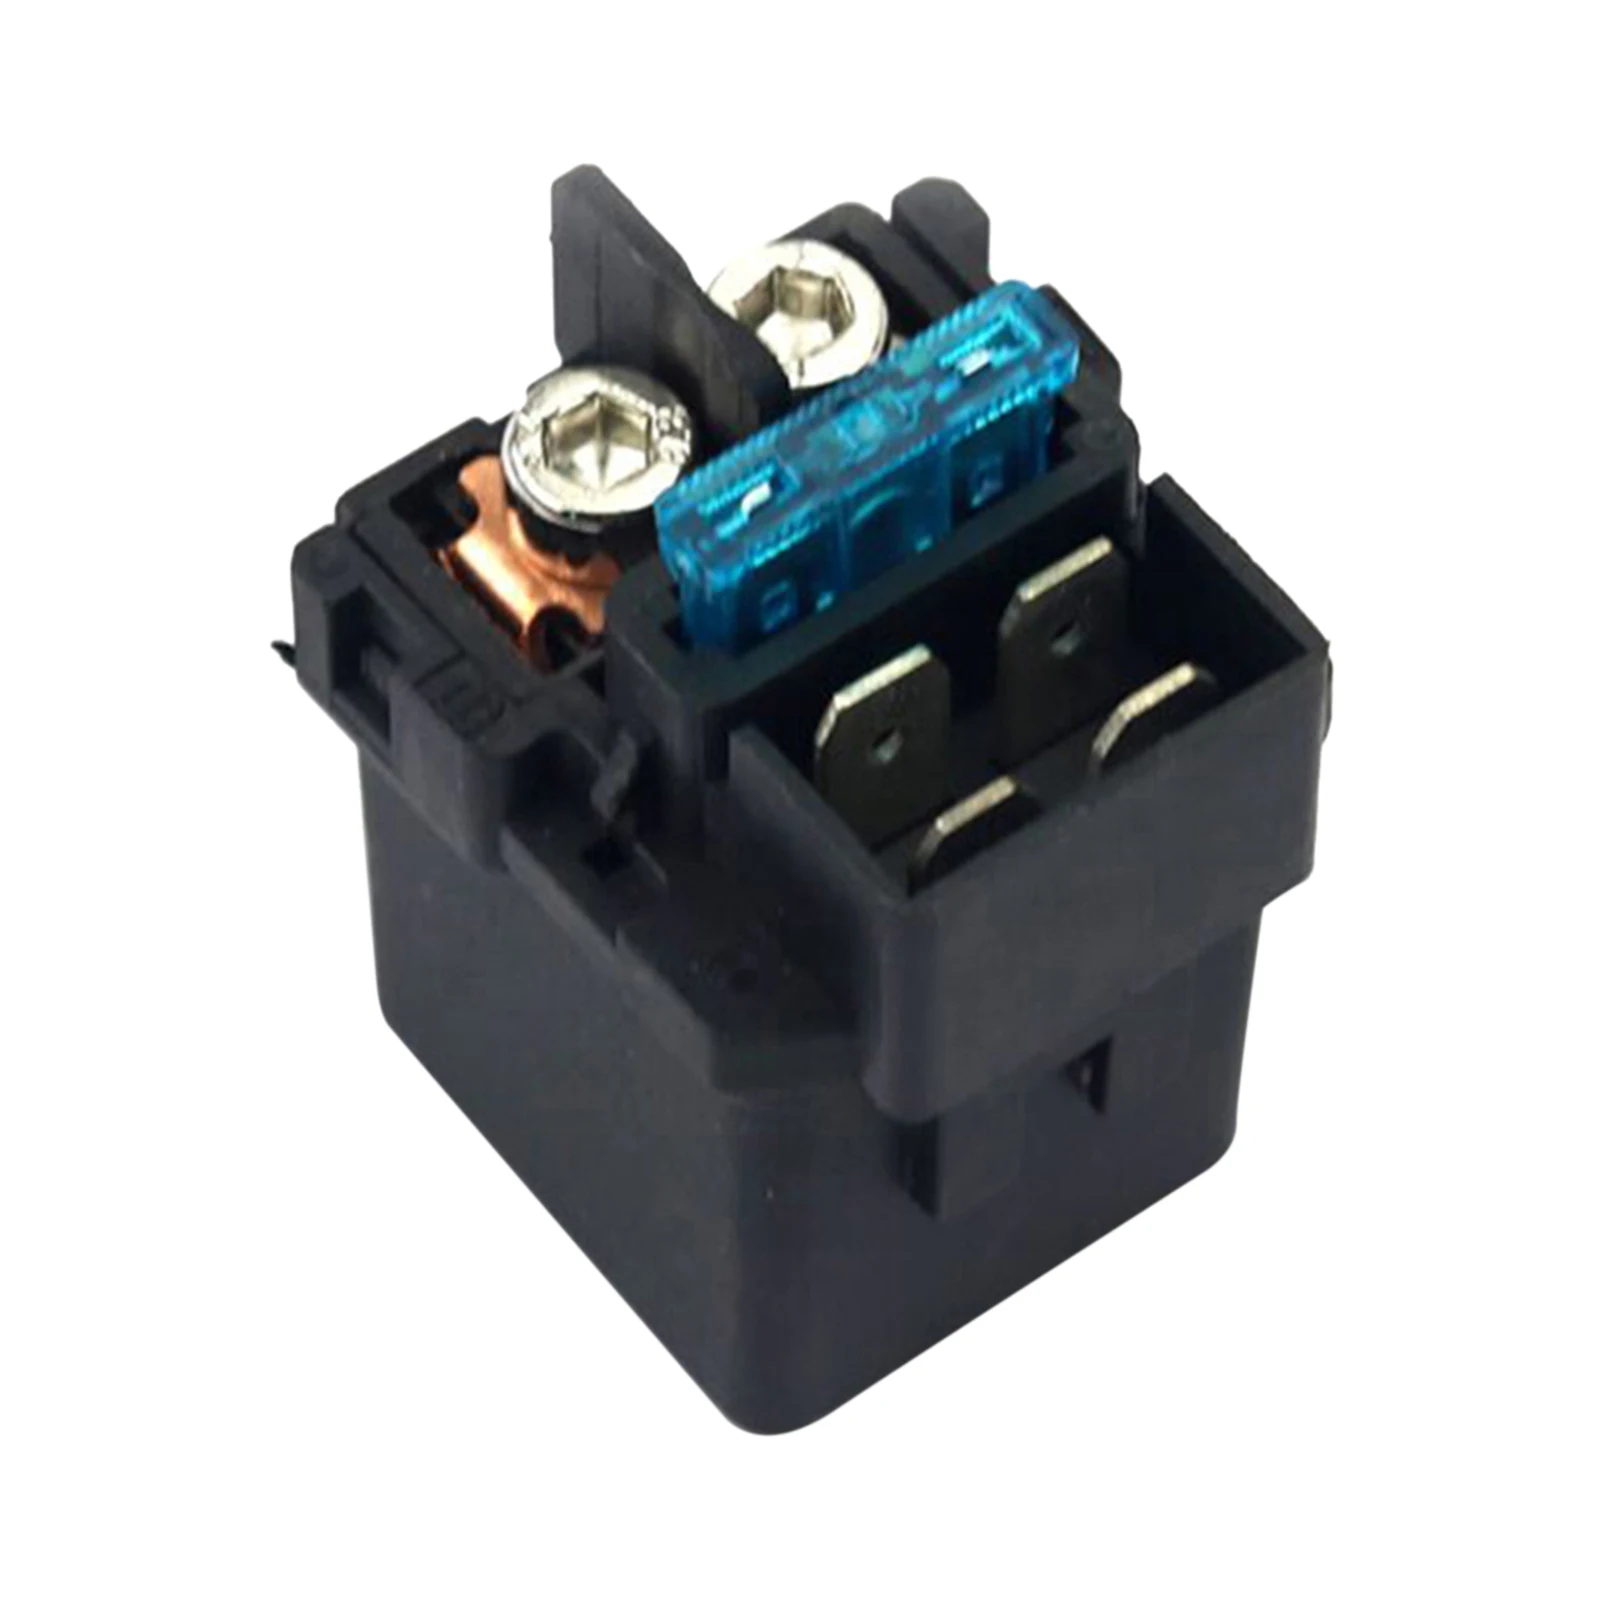 FZ16 Starter Relay Solenoid for Yamaha FZ 16 YS150 Electric Spare Parts